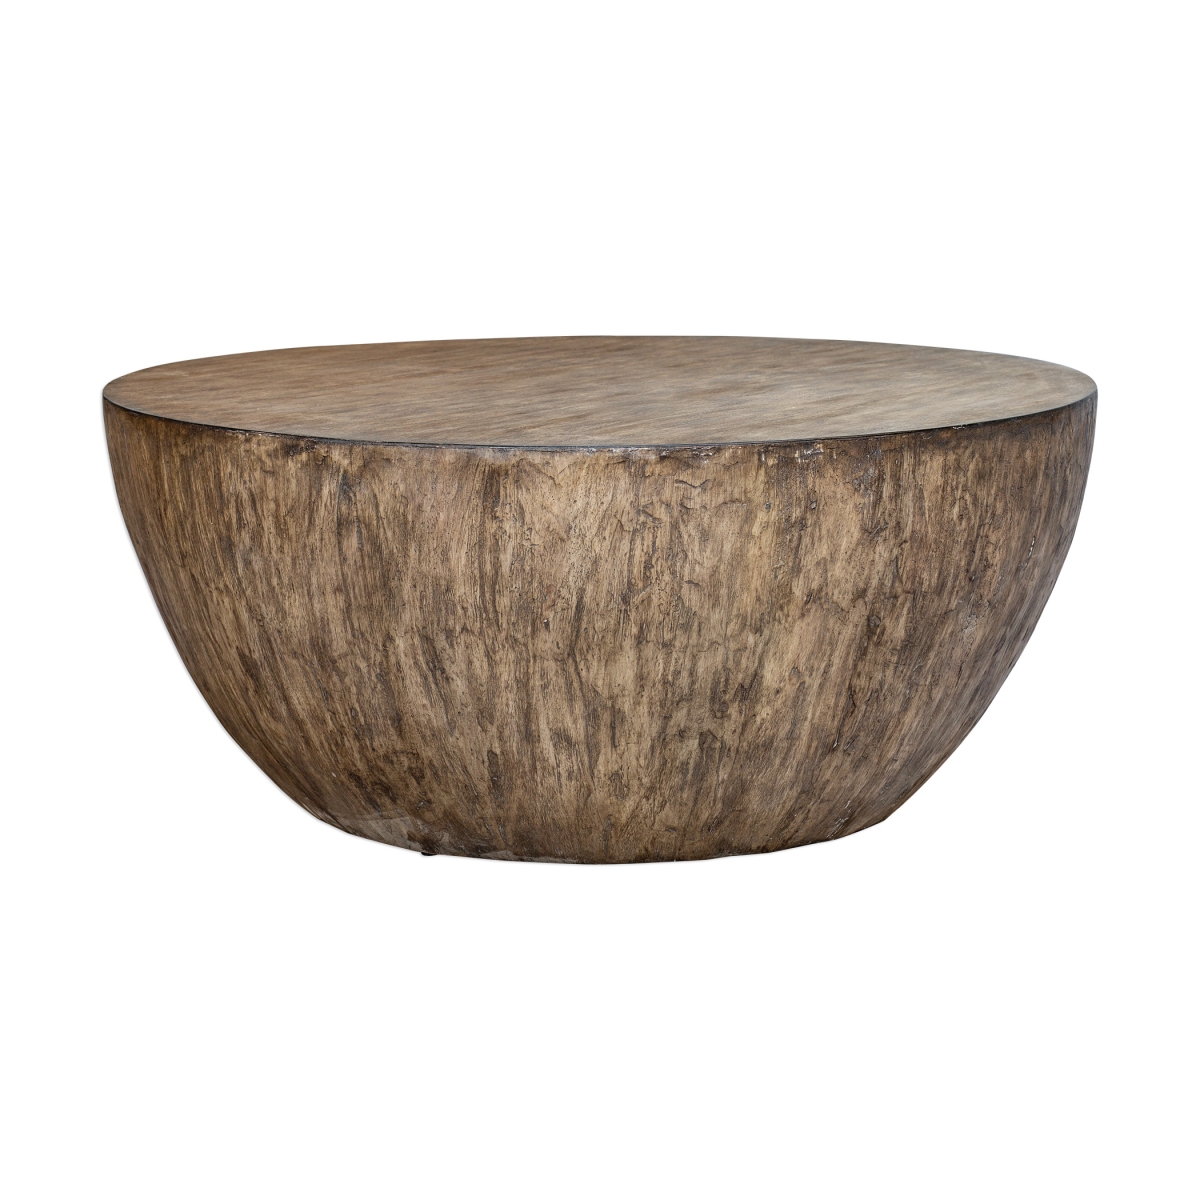 Picture of 212 Main 25433 Lark Round Wood Coffee Table